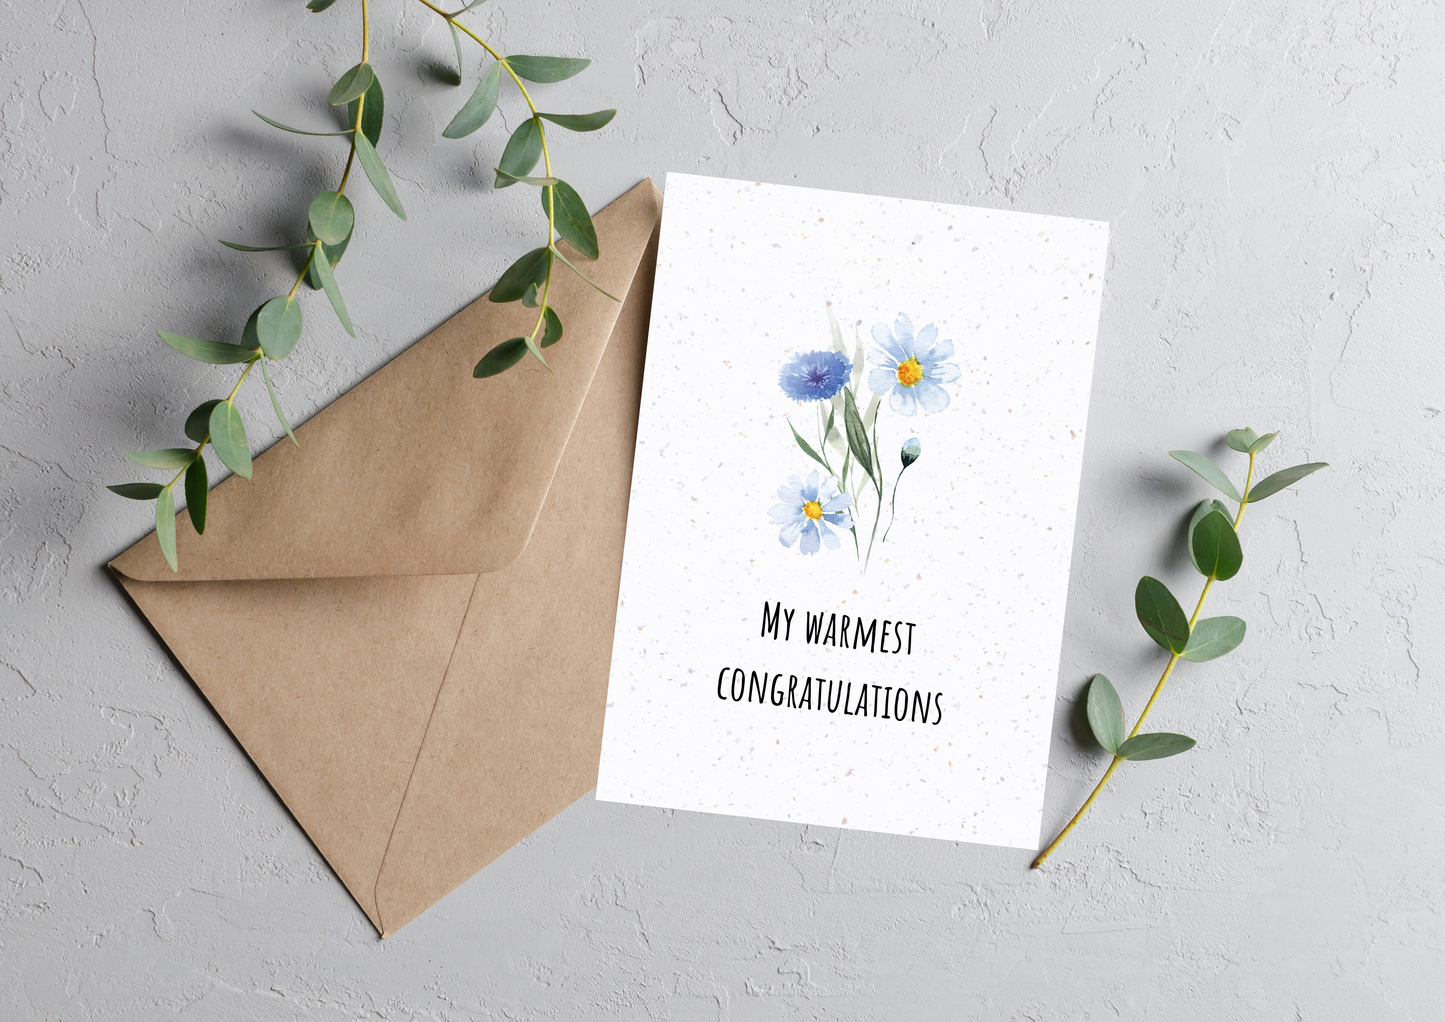 Congratulations 2  - Personalized Seed Paper Greeting Card